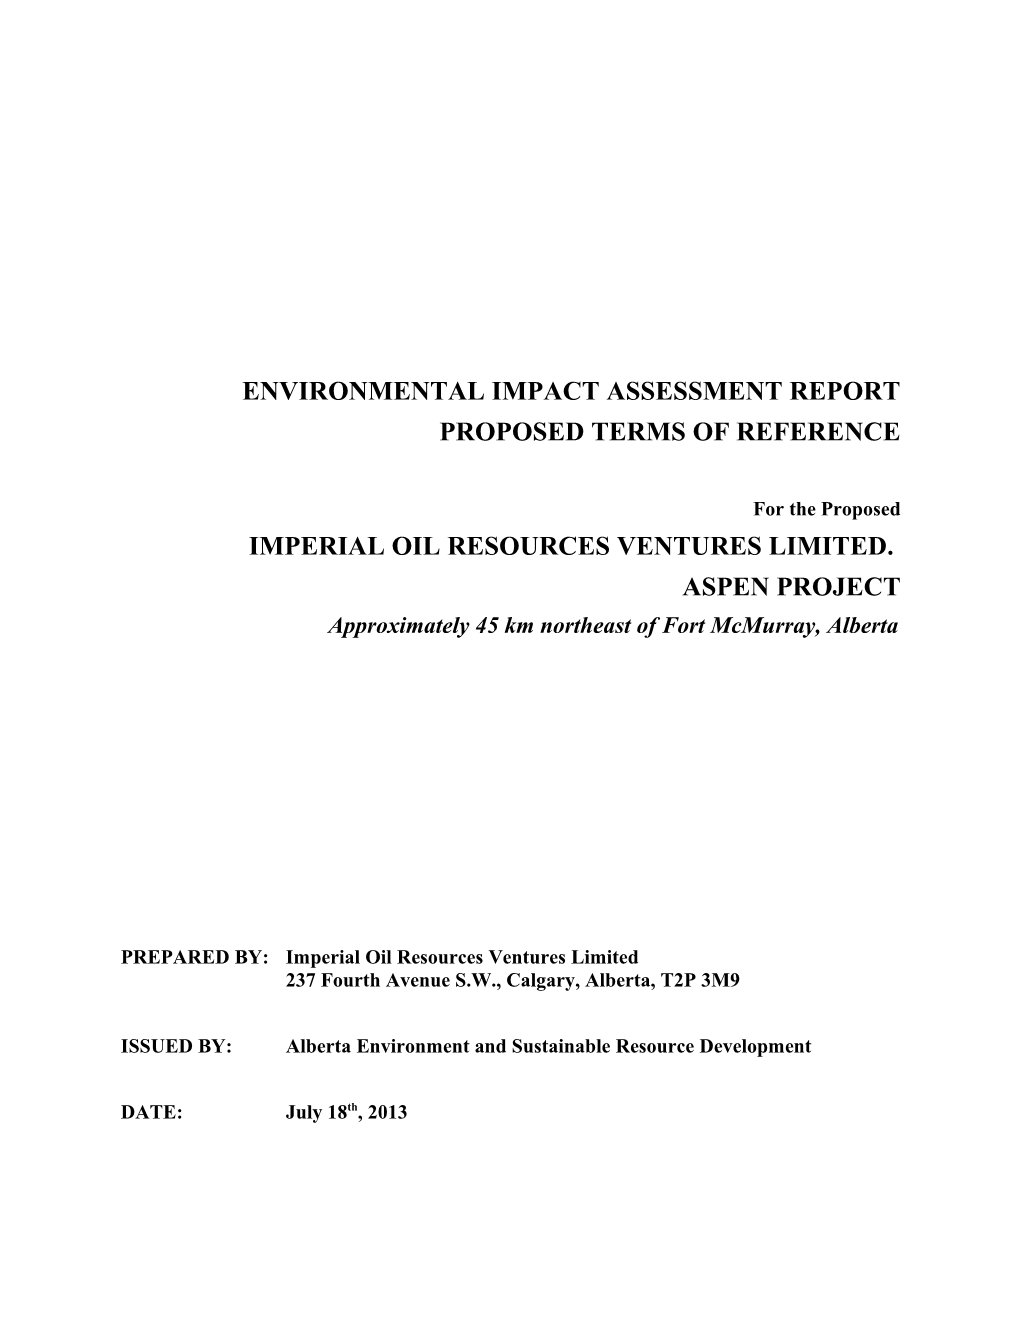 Proposed Terms of Reference Environmental Impact Assessment Report - Aspen Project